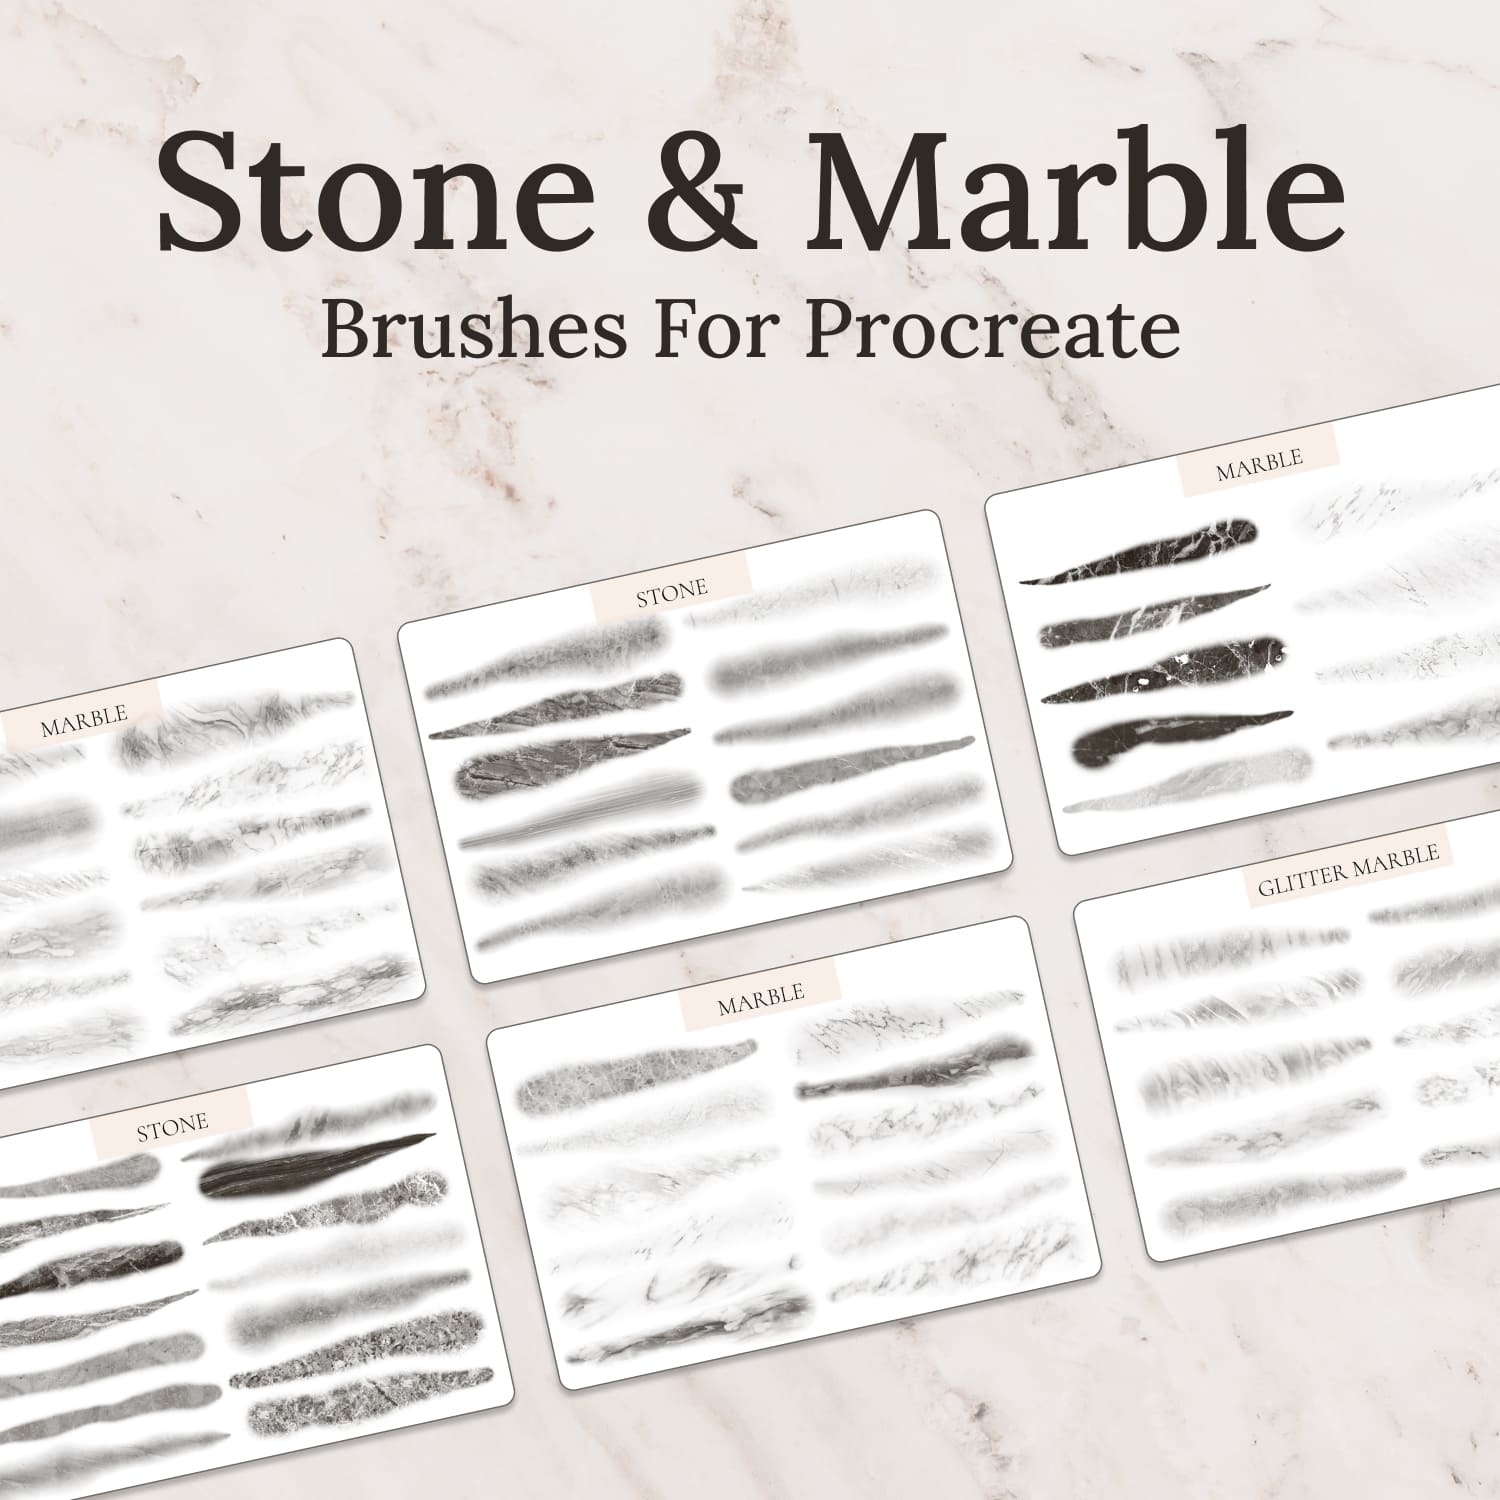 Stone & Marble Brushes for Procreate - main image preview.